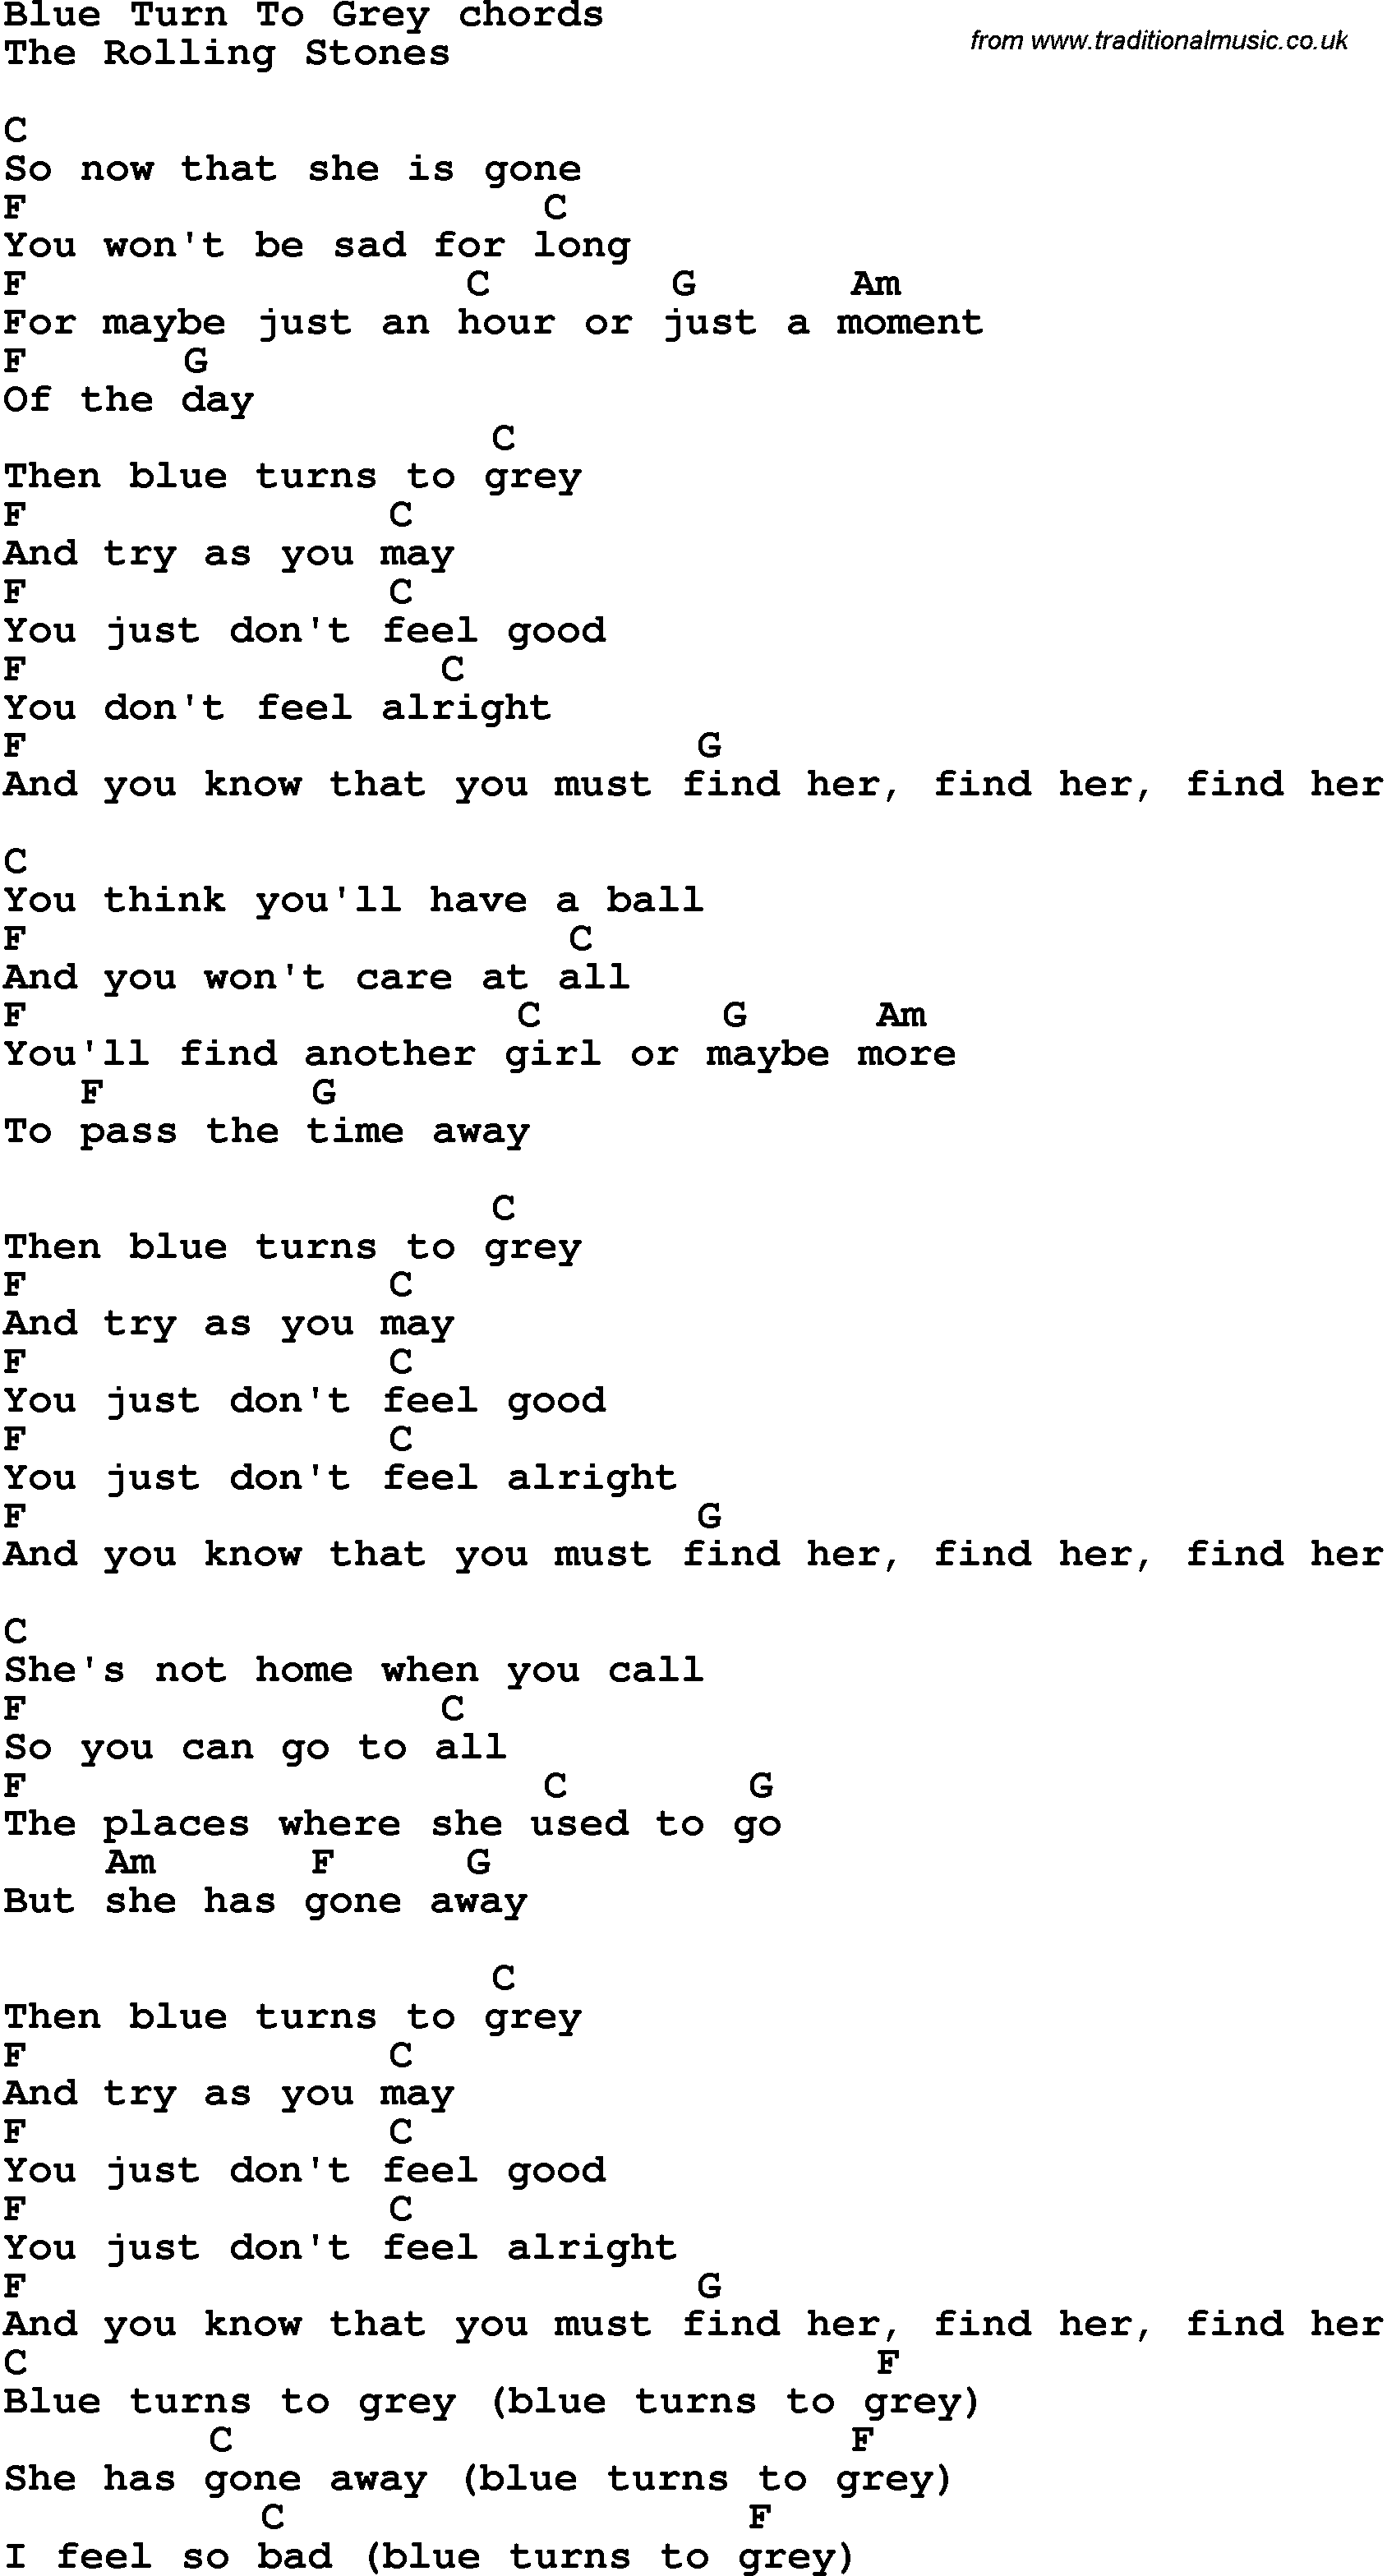 Song Lyrics with guitar chords for Blue Turn To Grey